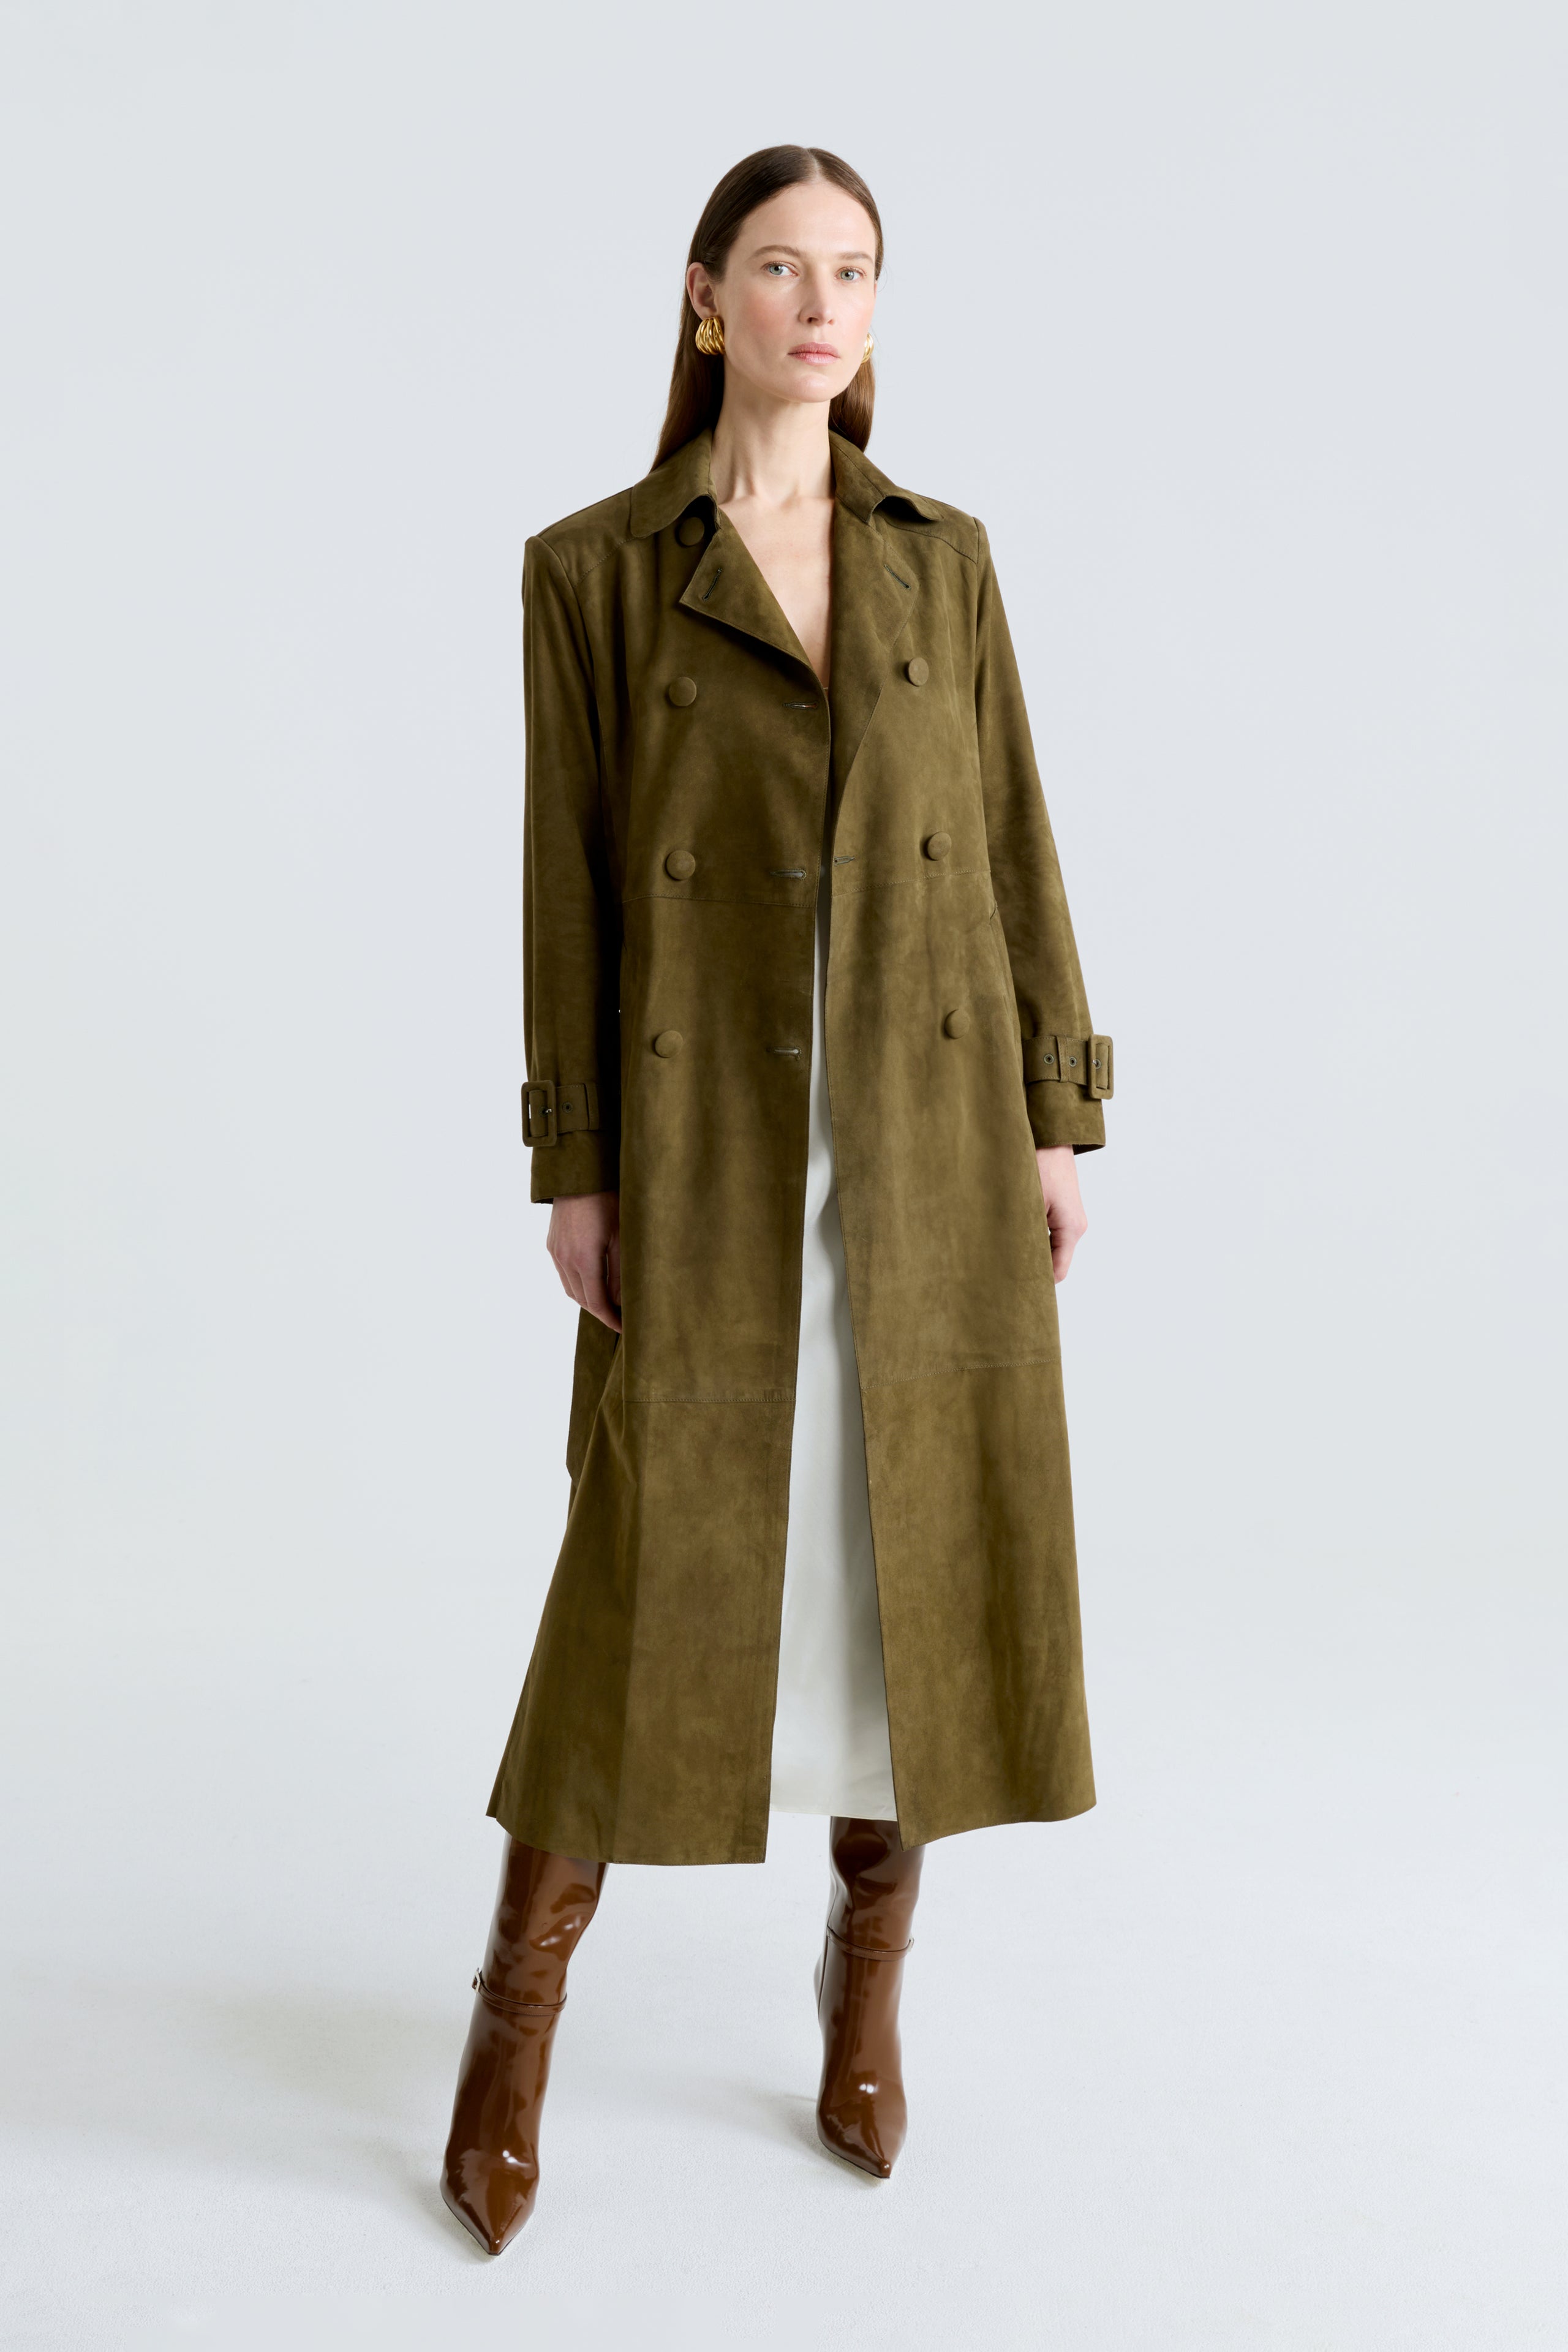 Model is wearing the Tate Olive Everyday Suede Trench Front